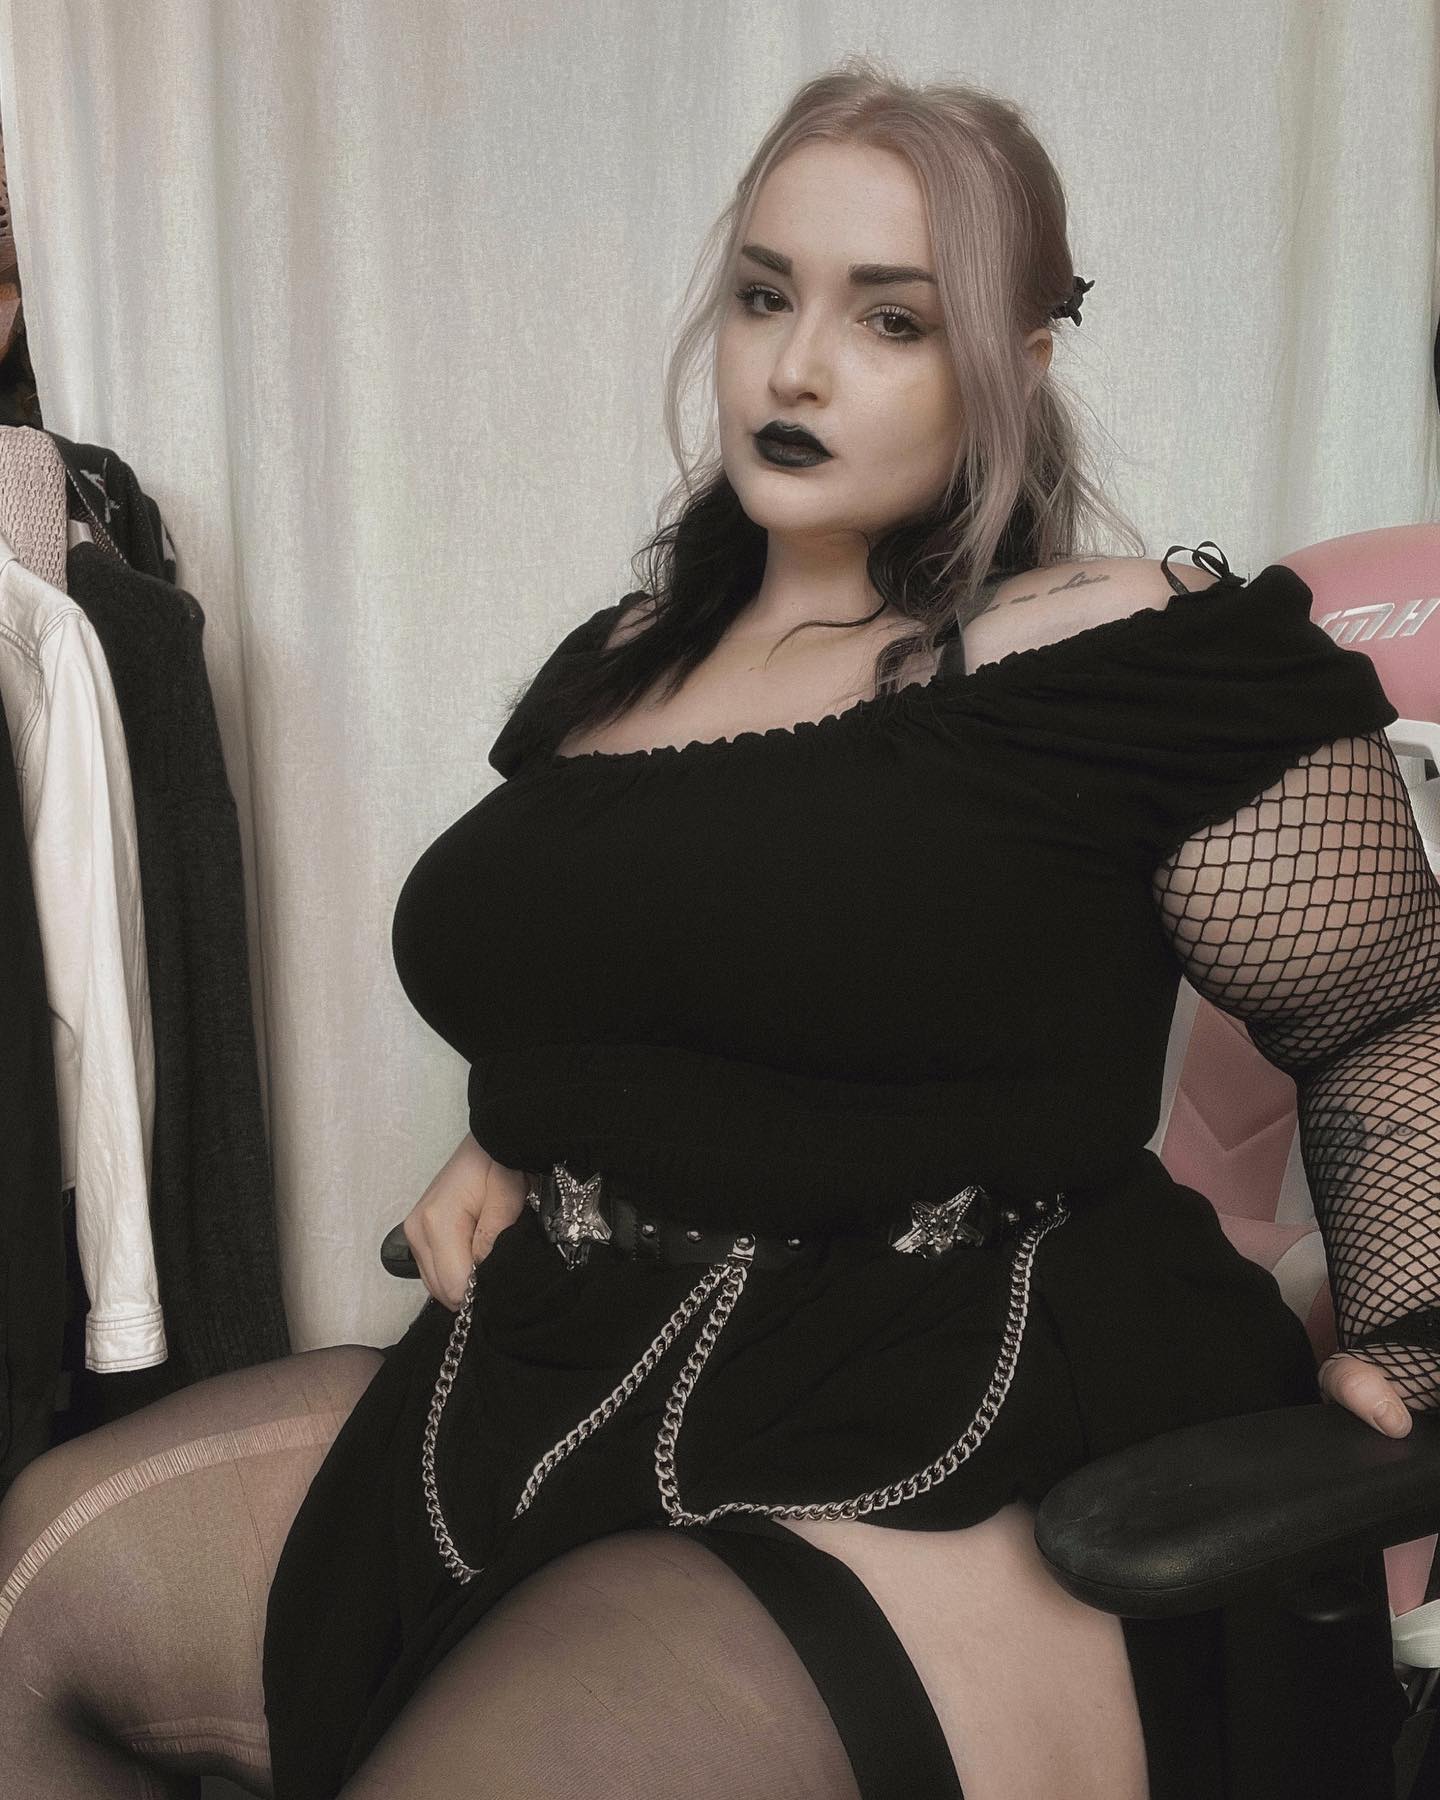 Giving dream gothic gothic girlfriend 😎👻🖤 follow my backup when you can find my VIP stuff @goddessofthepeach_ 💙